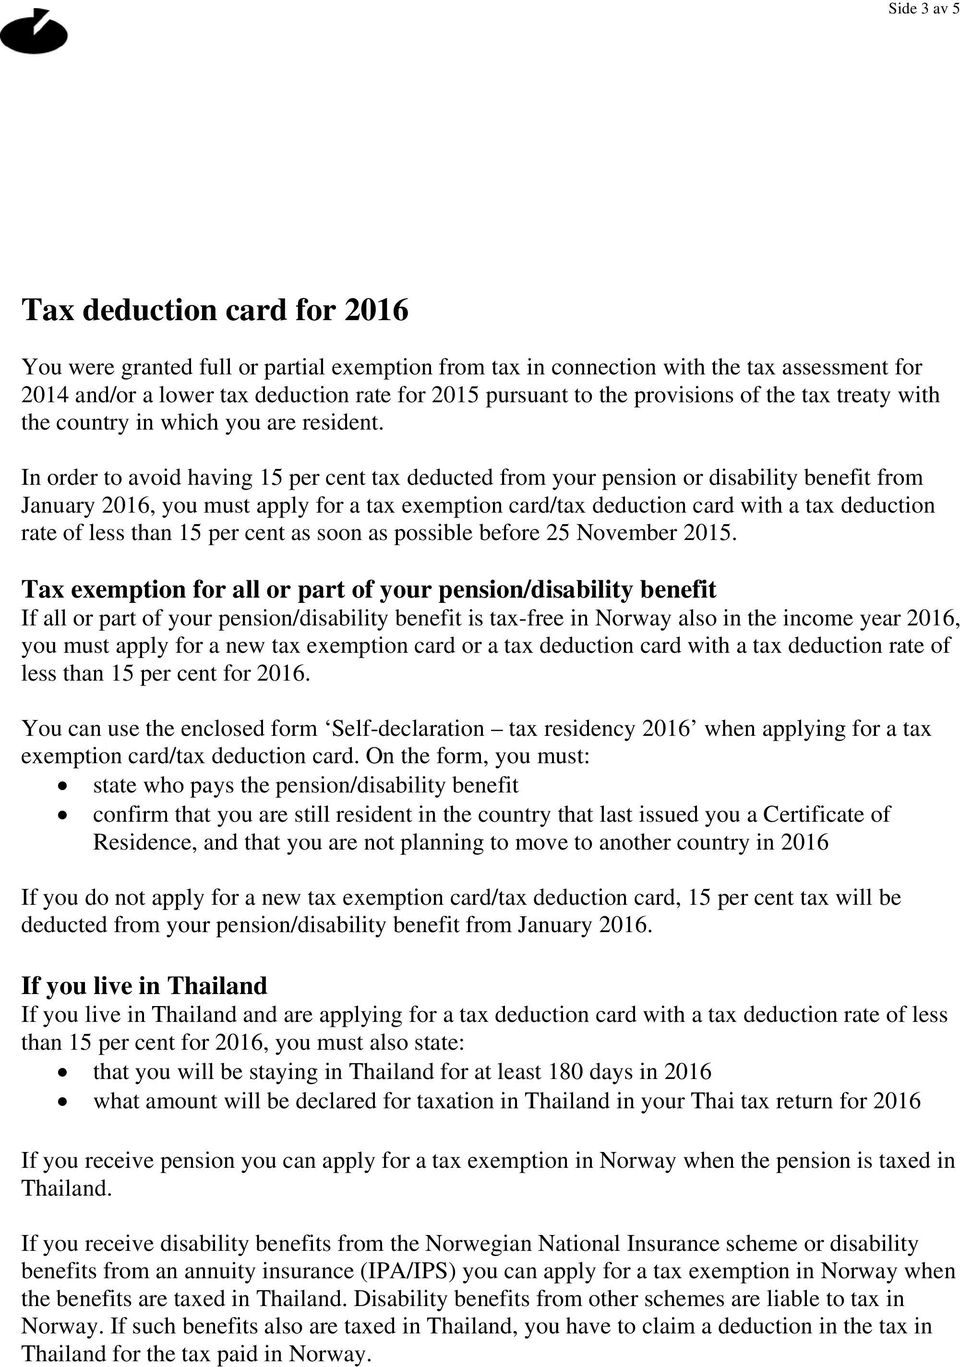 In order to avoid having 15 per cent tax deducted from your pension or disability benefit from January 2016, you must apply for a tax exemption card/tax deduction card with a tax deduction rate of